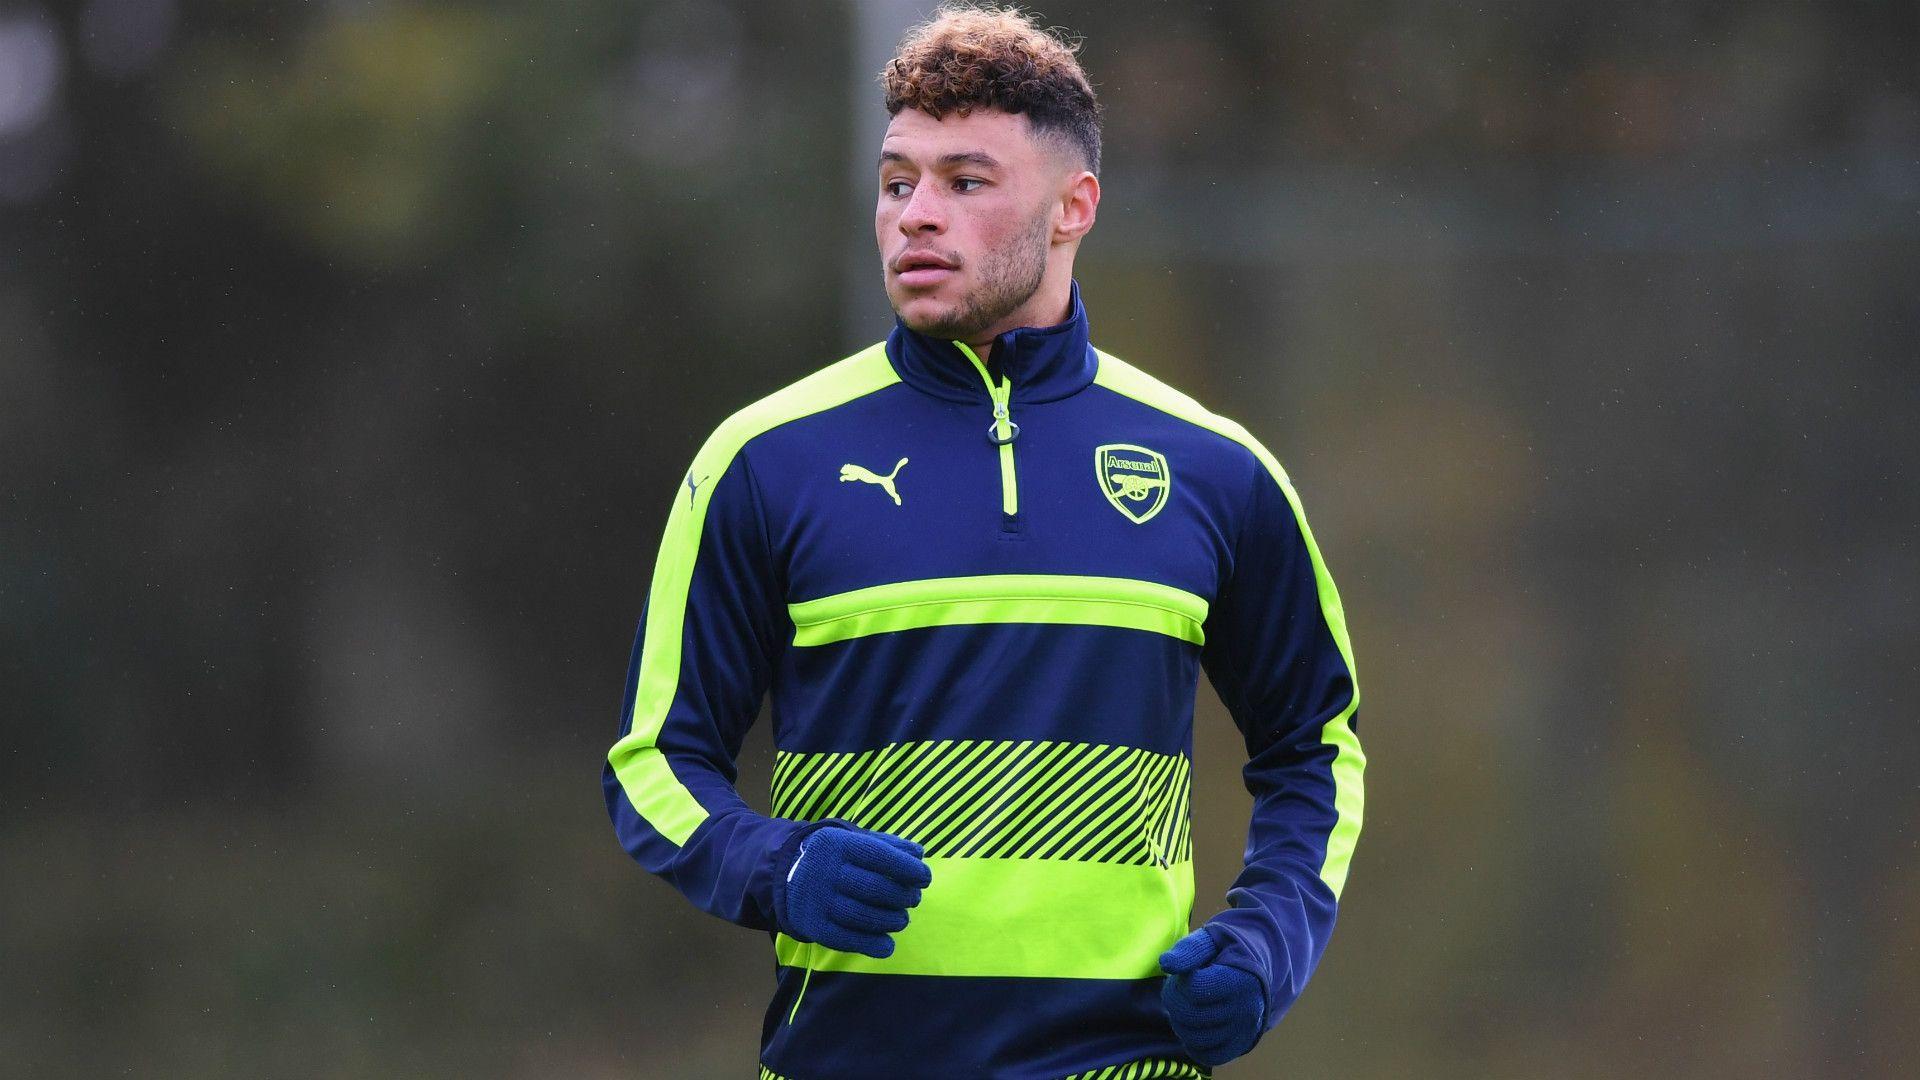 Arsenal's Alex Oxlade Chamberlain Could Move To Liverpool Not